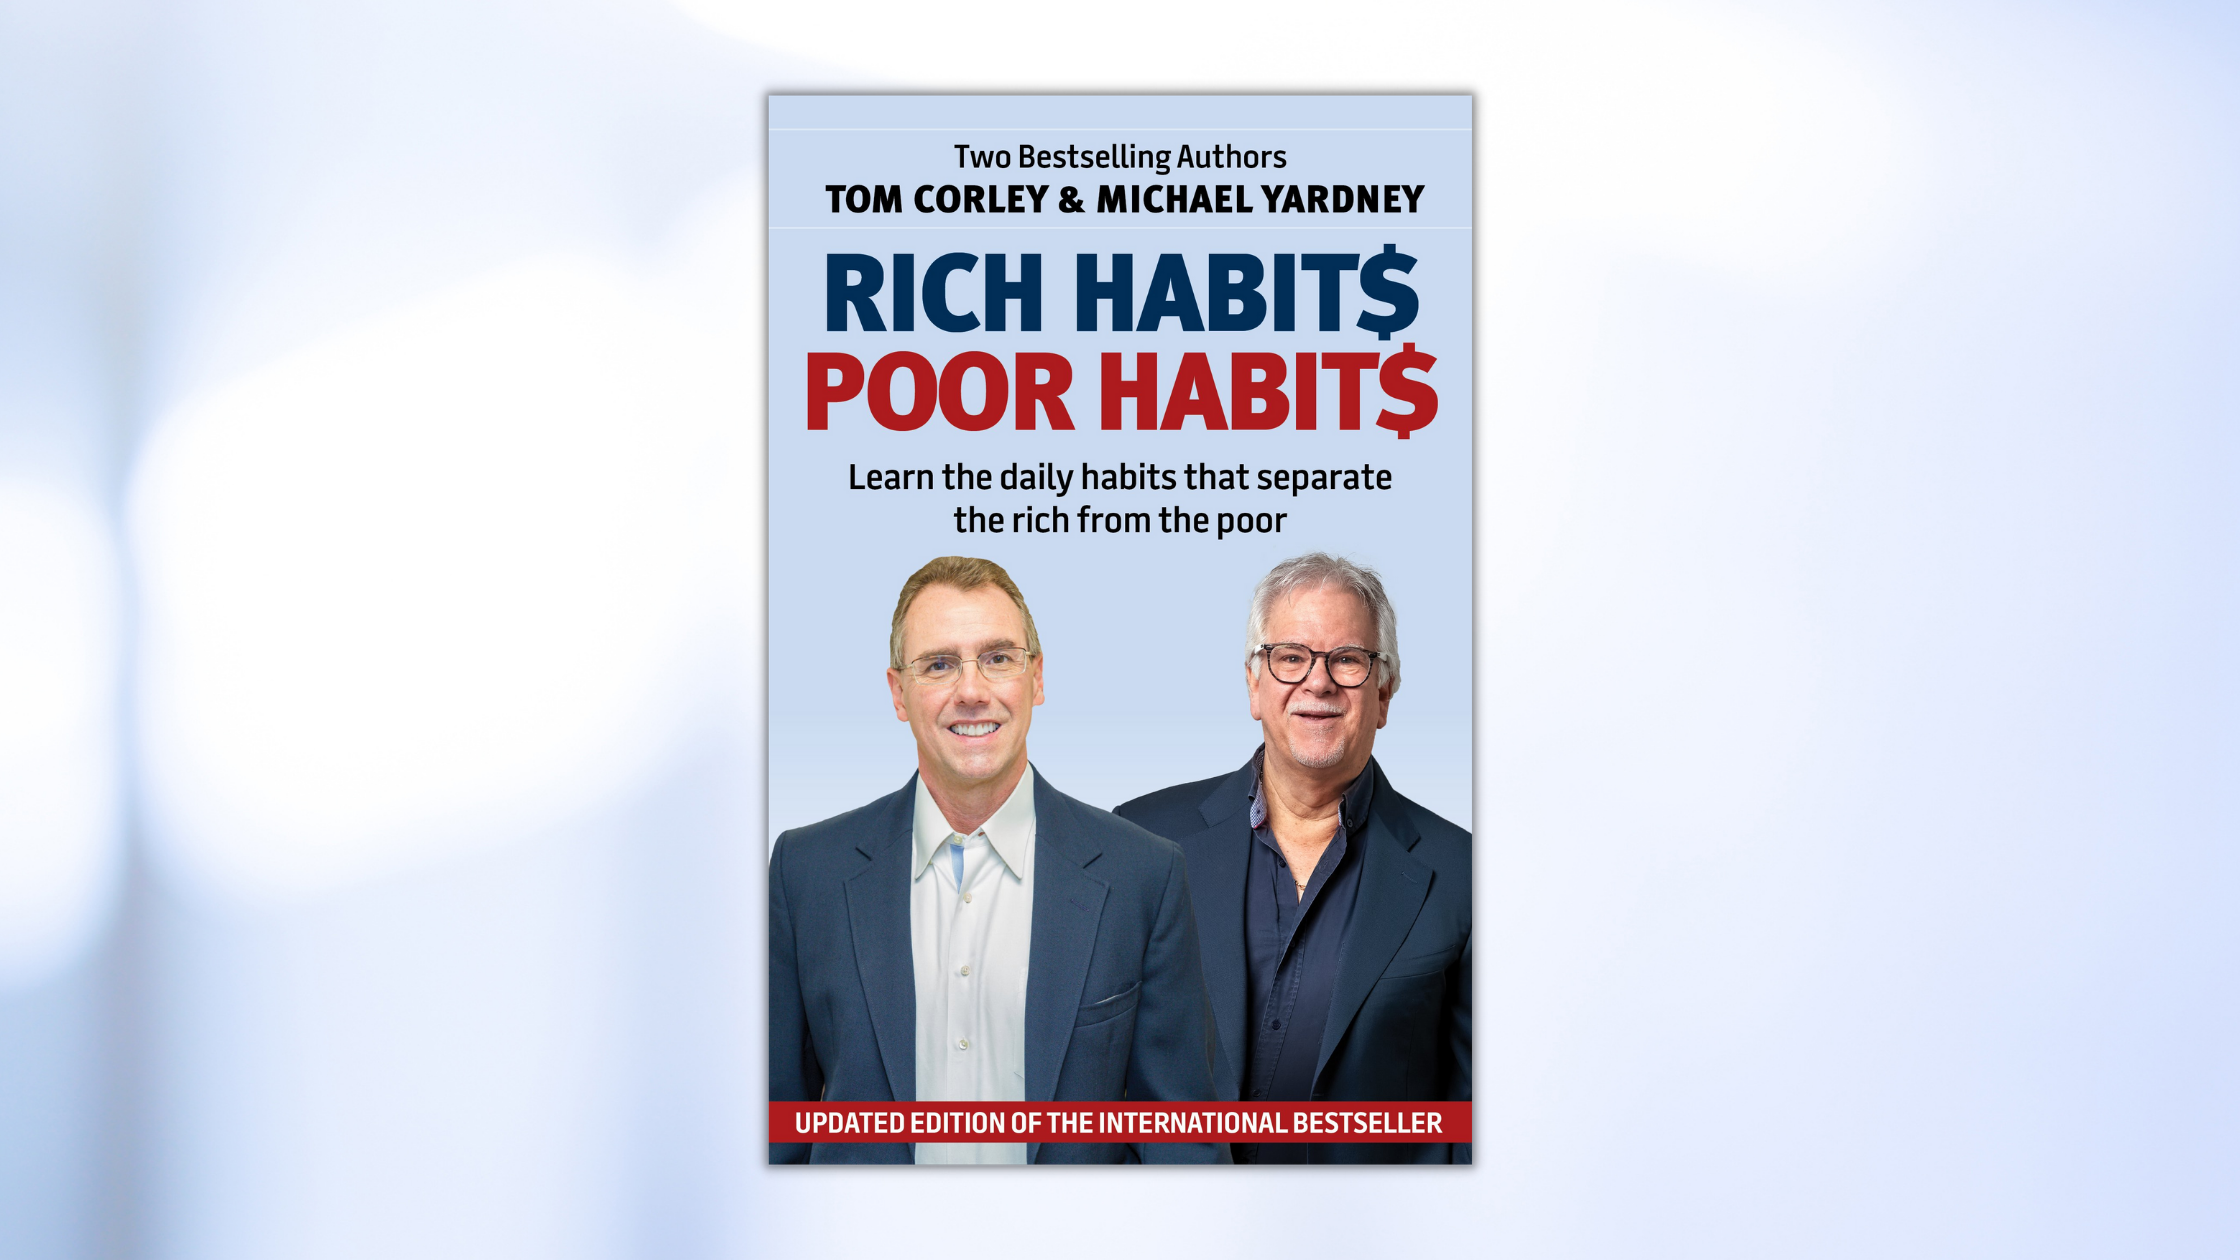 RichHabits_bookclubpick_headerimage.png